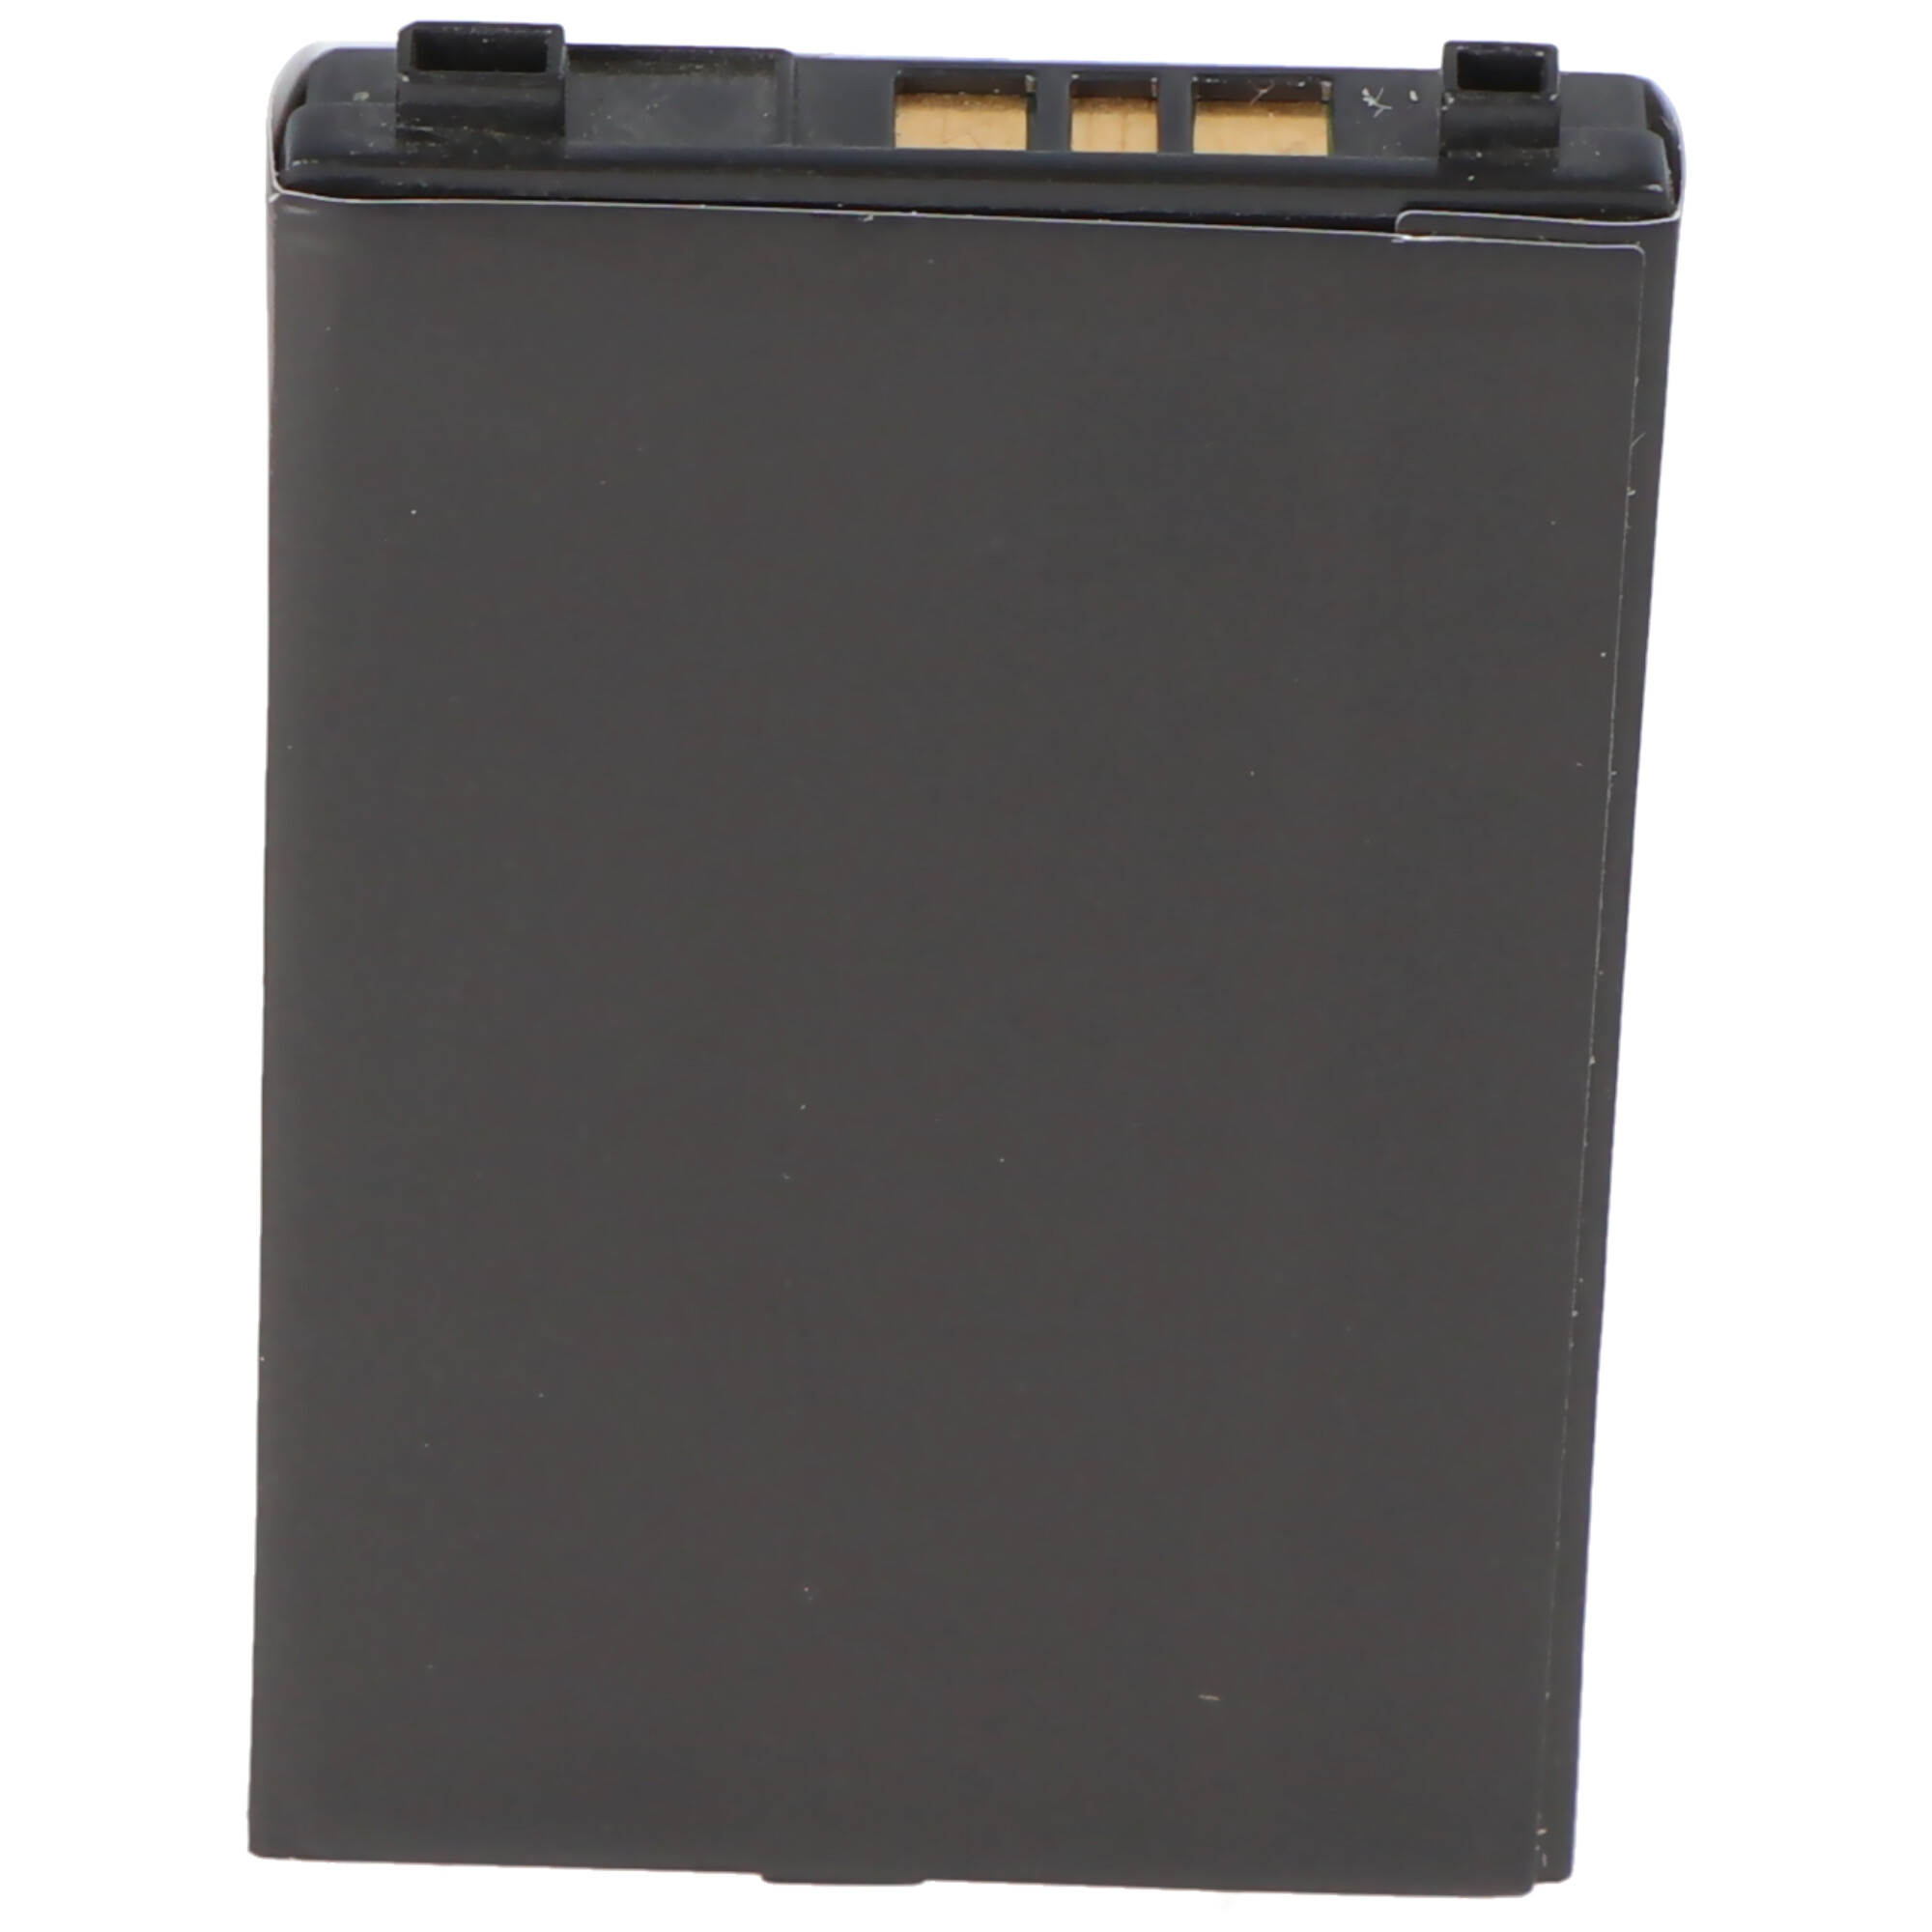 AccuCell battery for Sony Ericsson J200i, T230, T226, K500